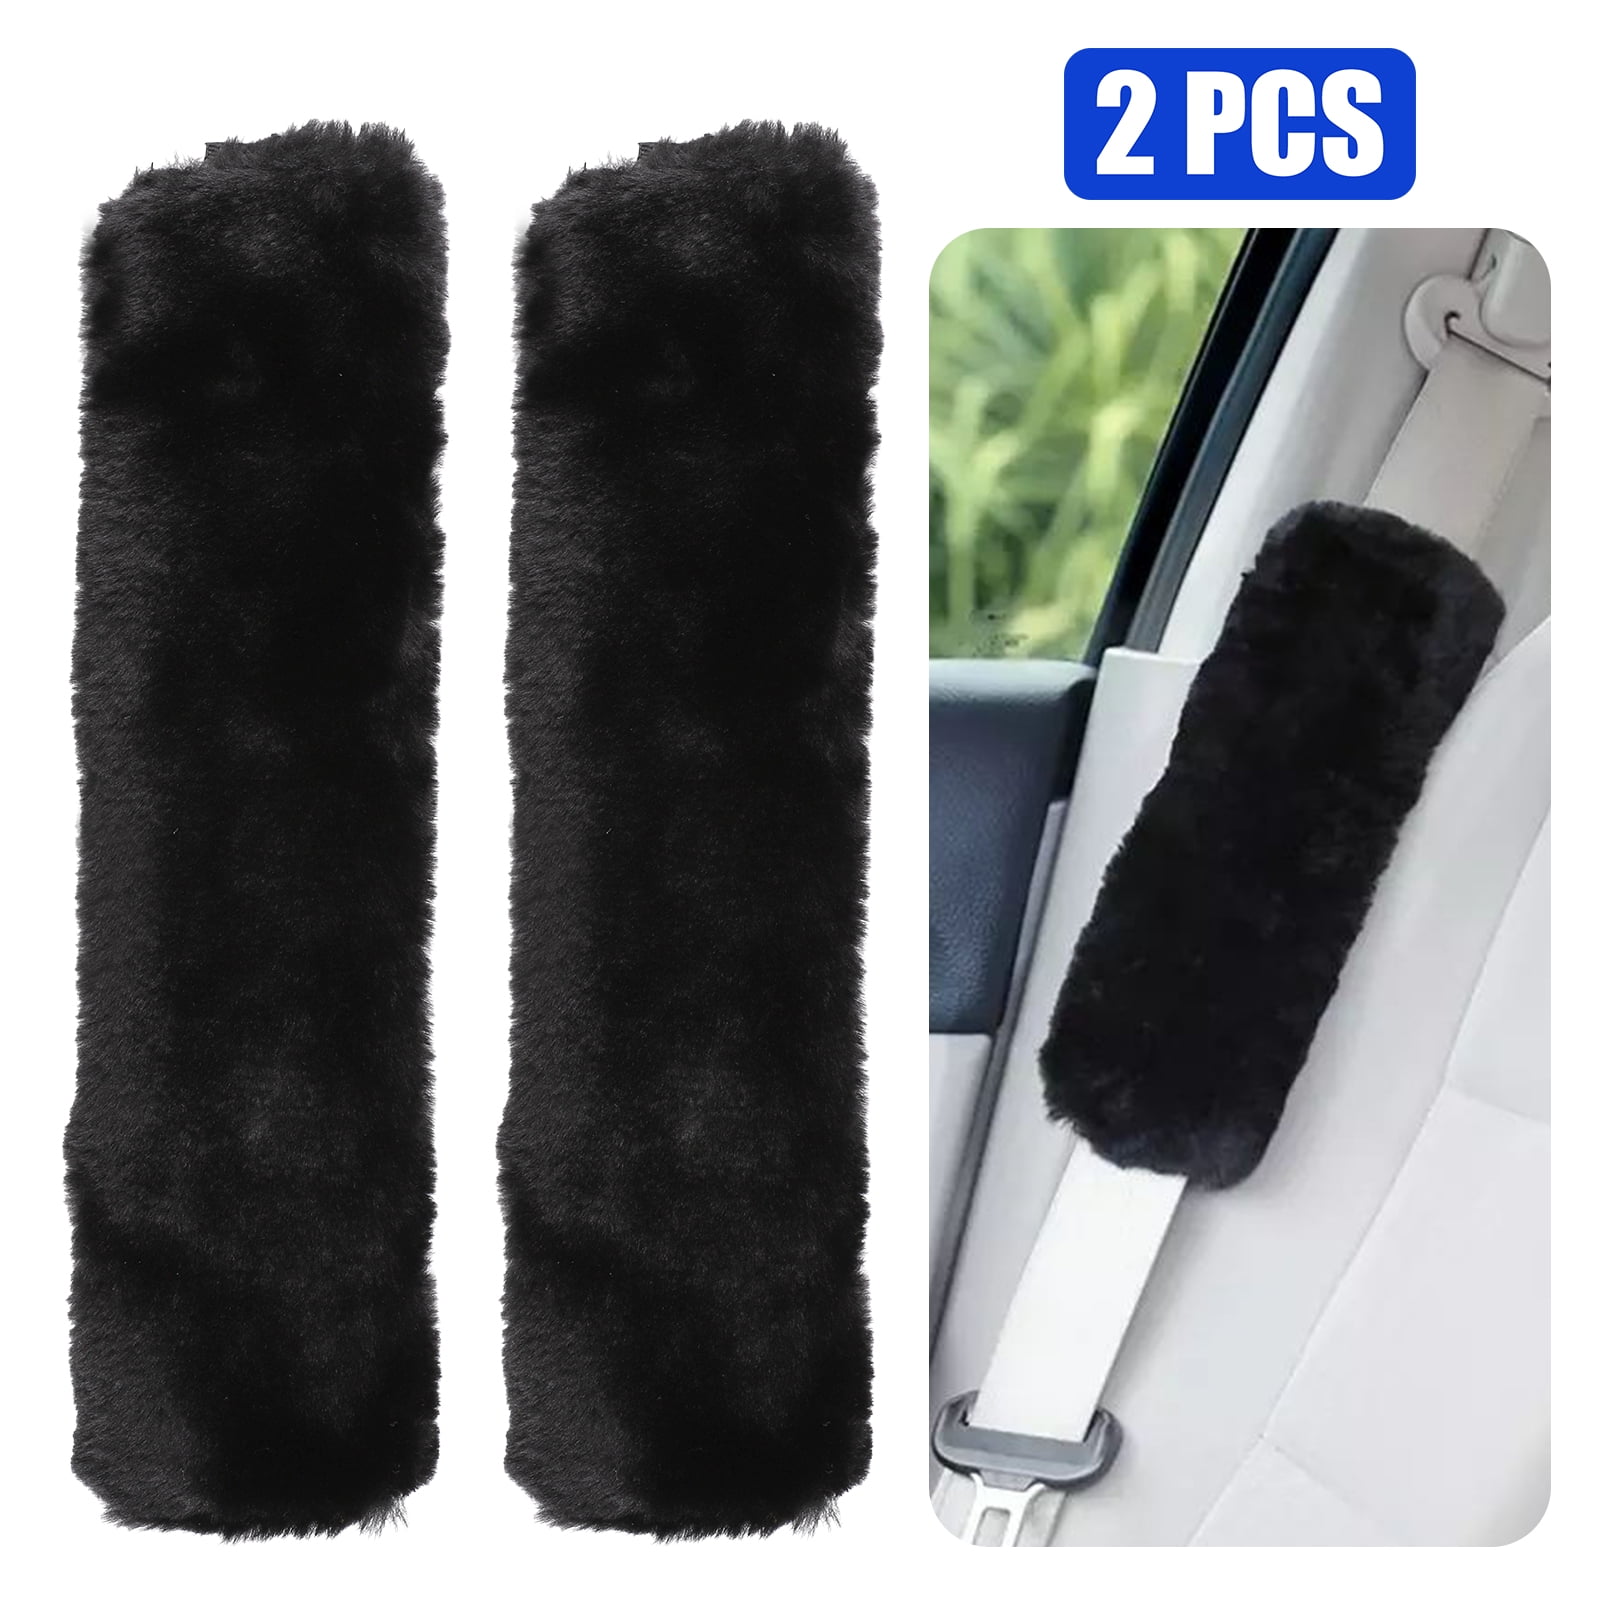 4x Car Seat Belt Pads Harness Safety Shoulder Strap BackPack Cushion Covers kids 